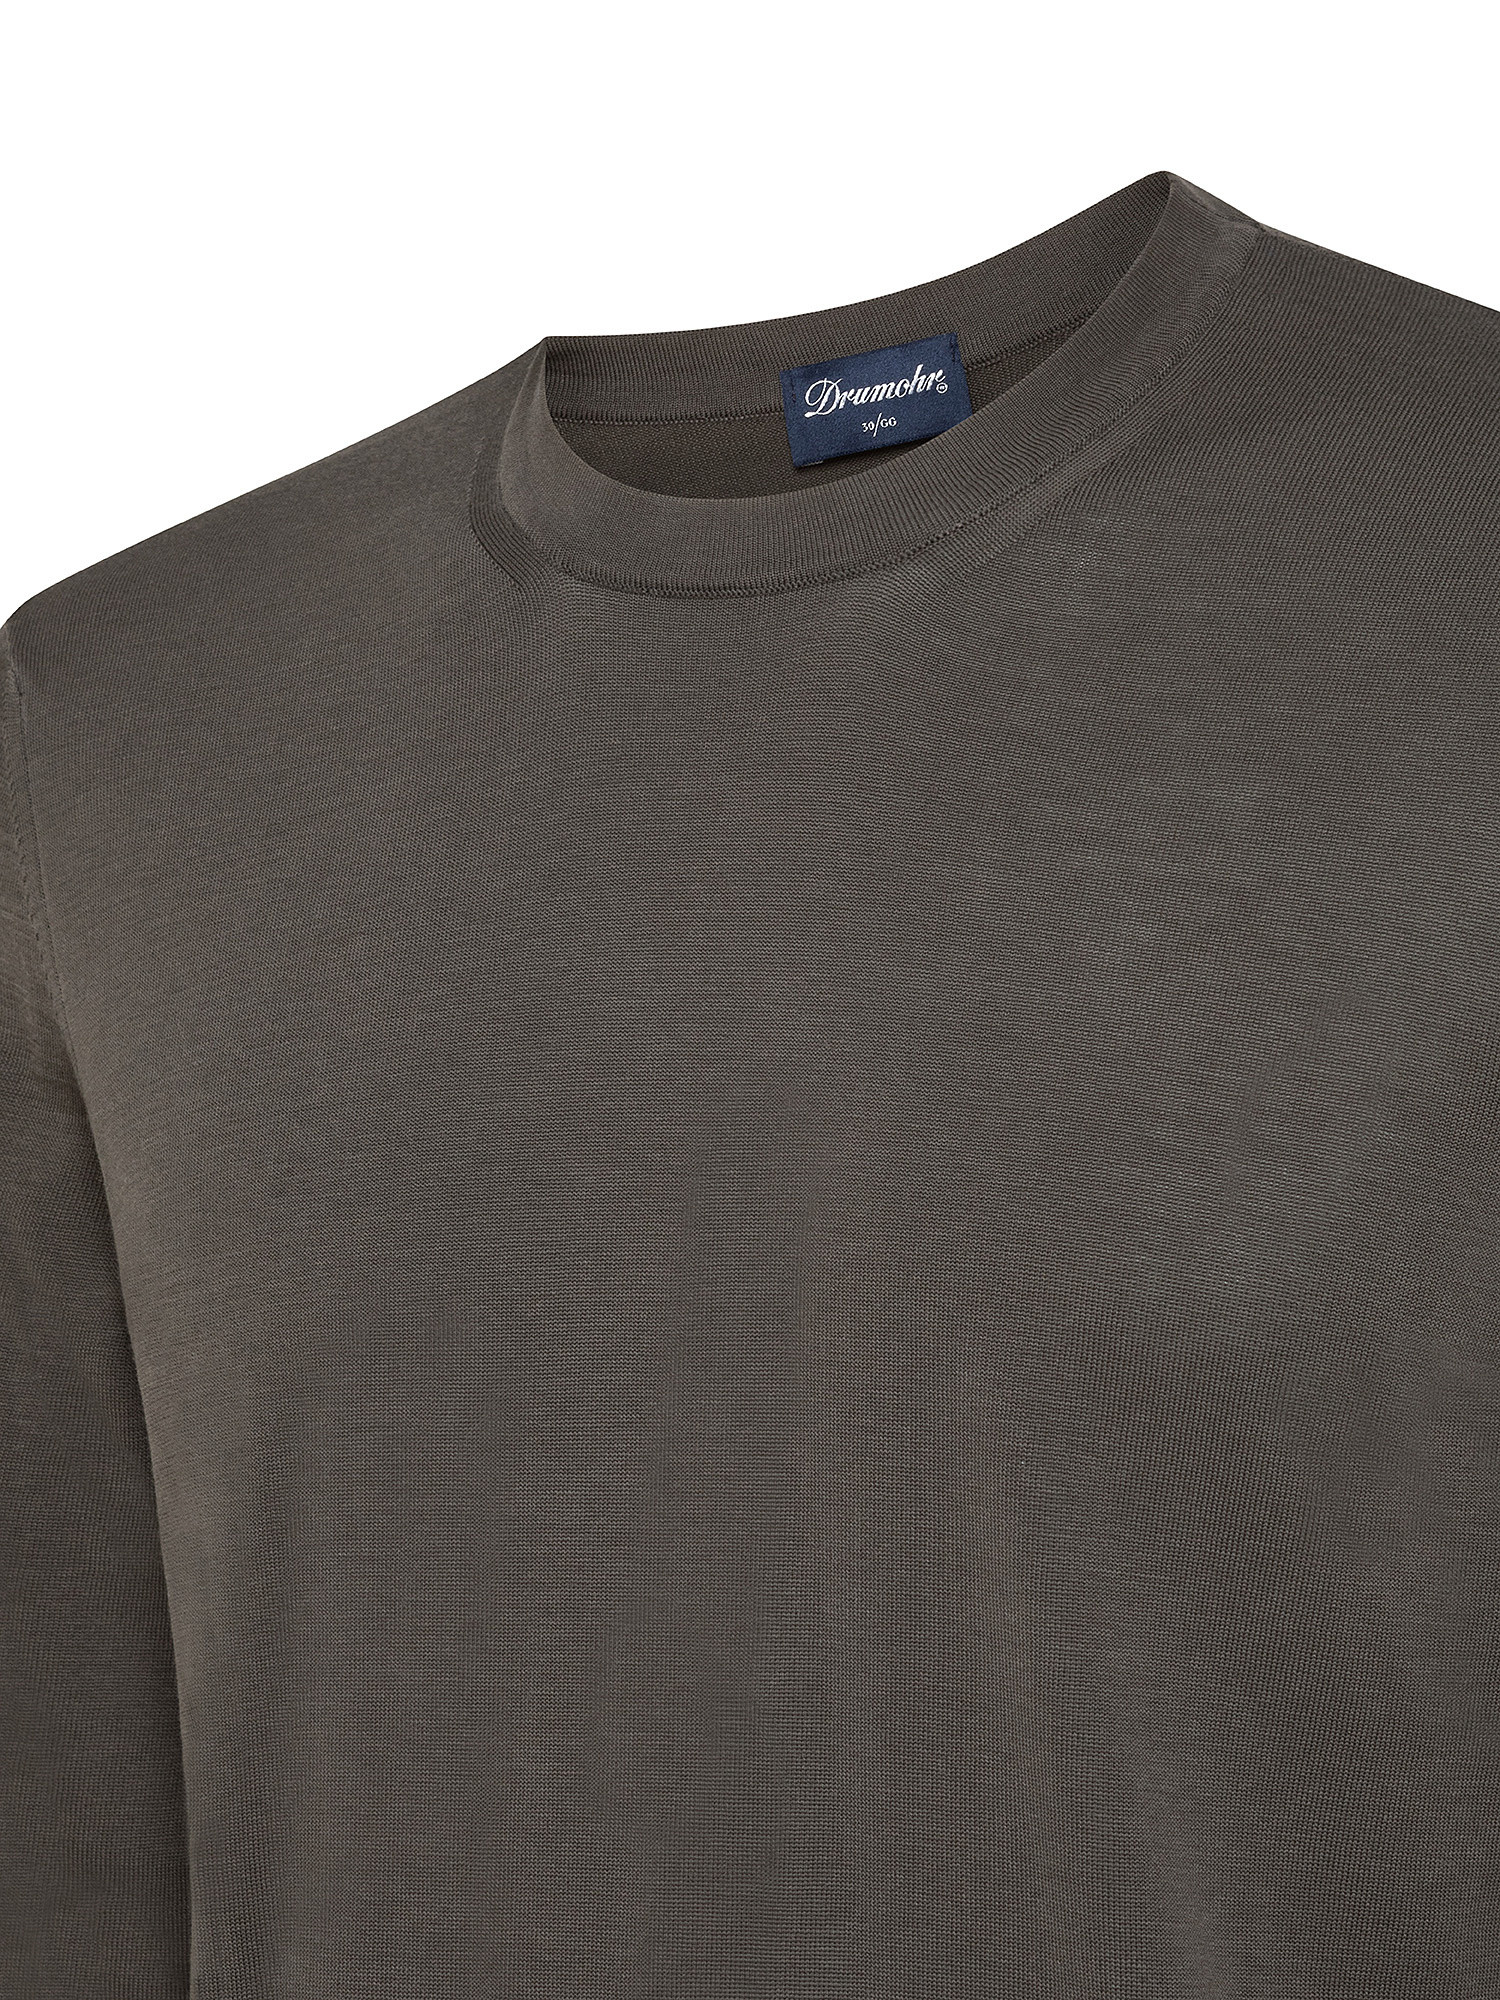 Crewneck pullover, Anthracite, large image number 2